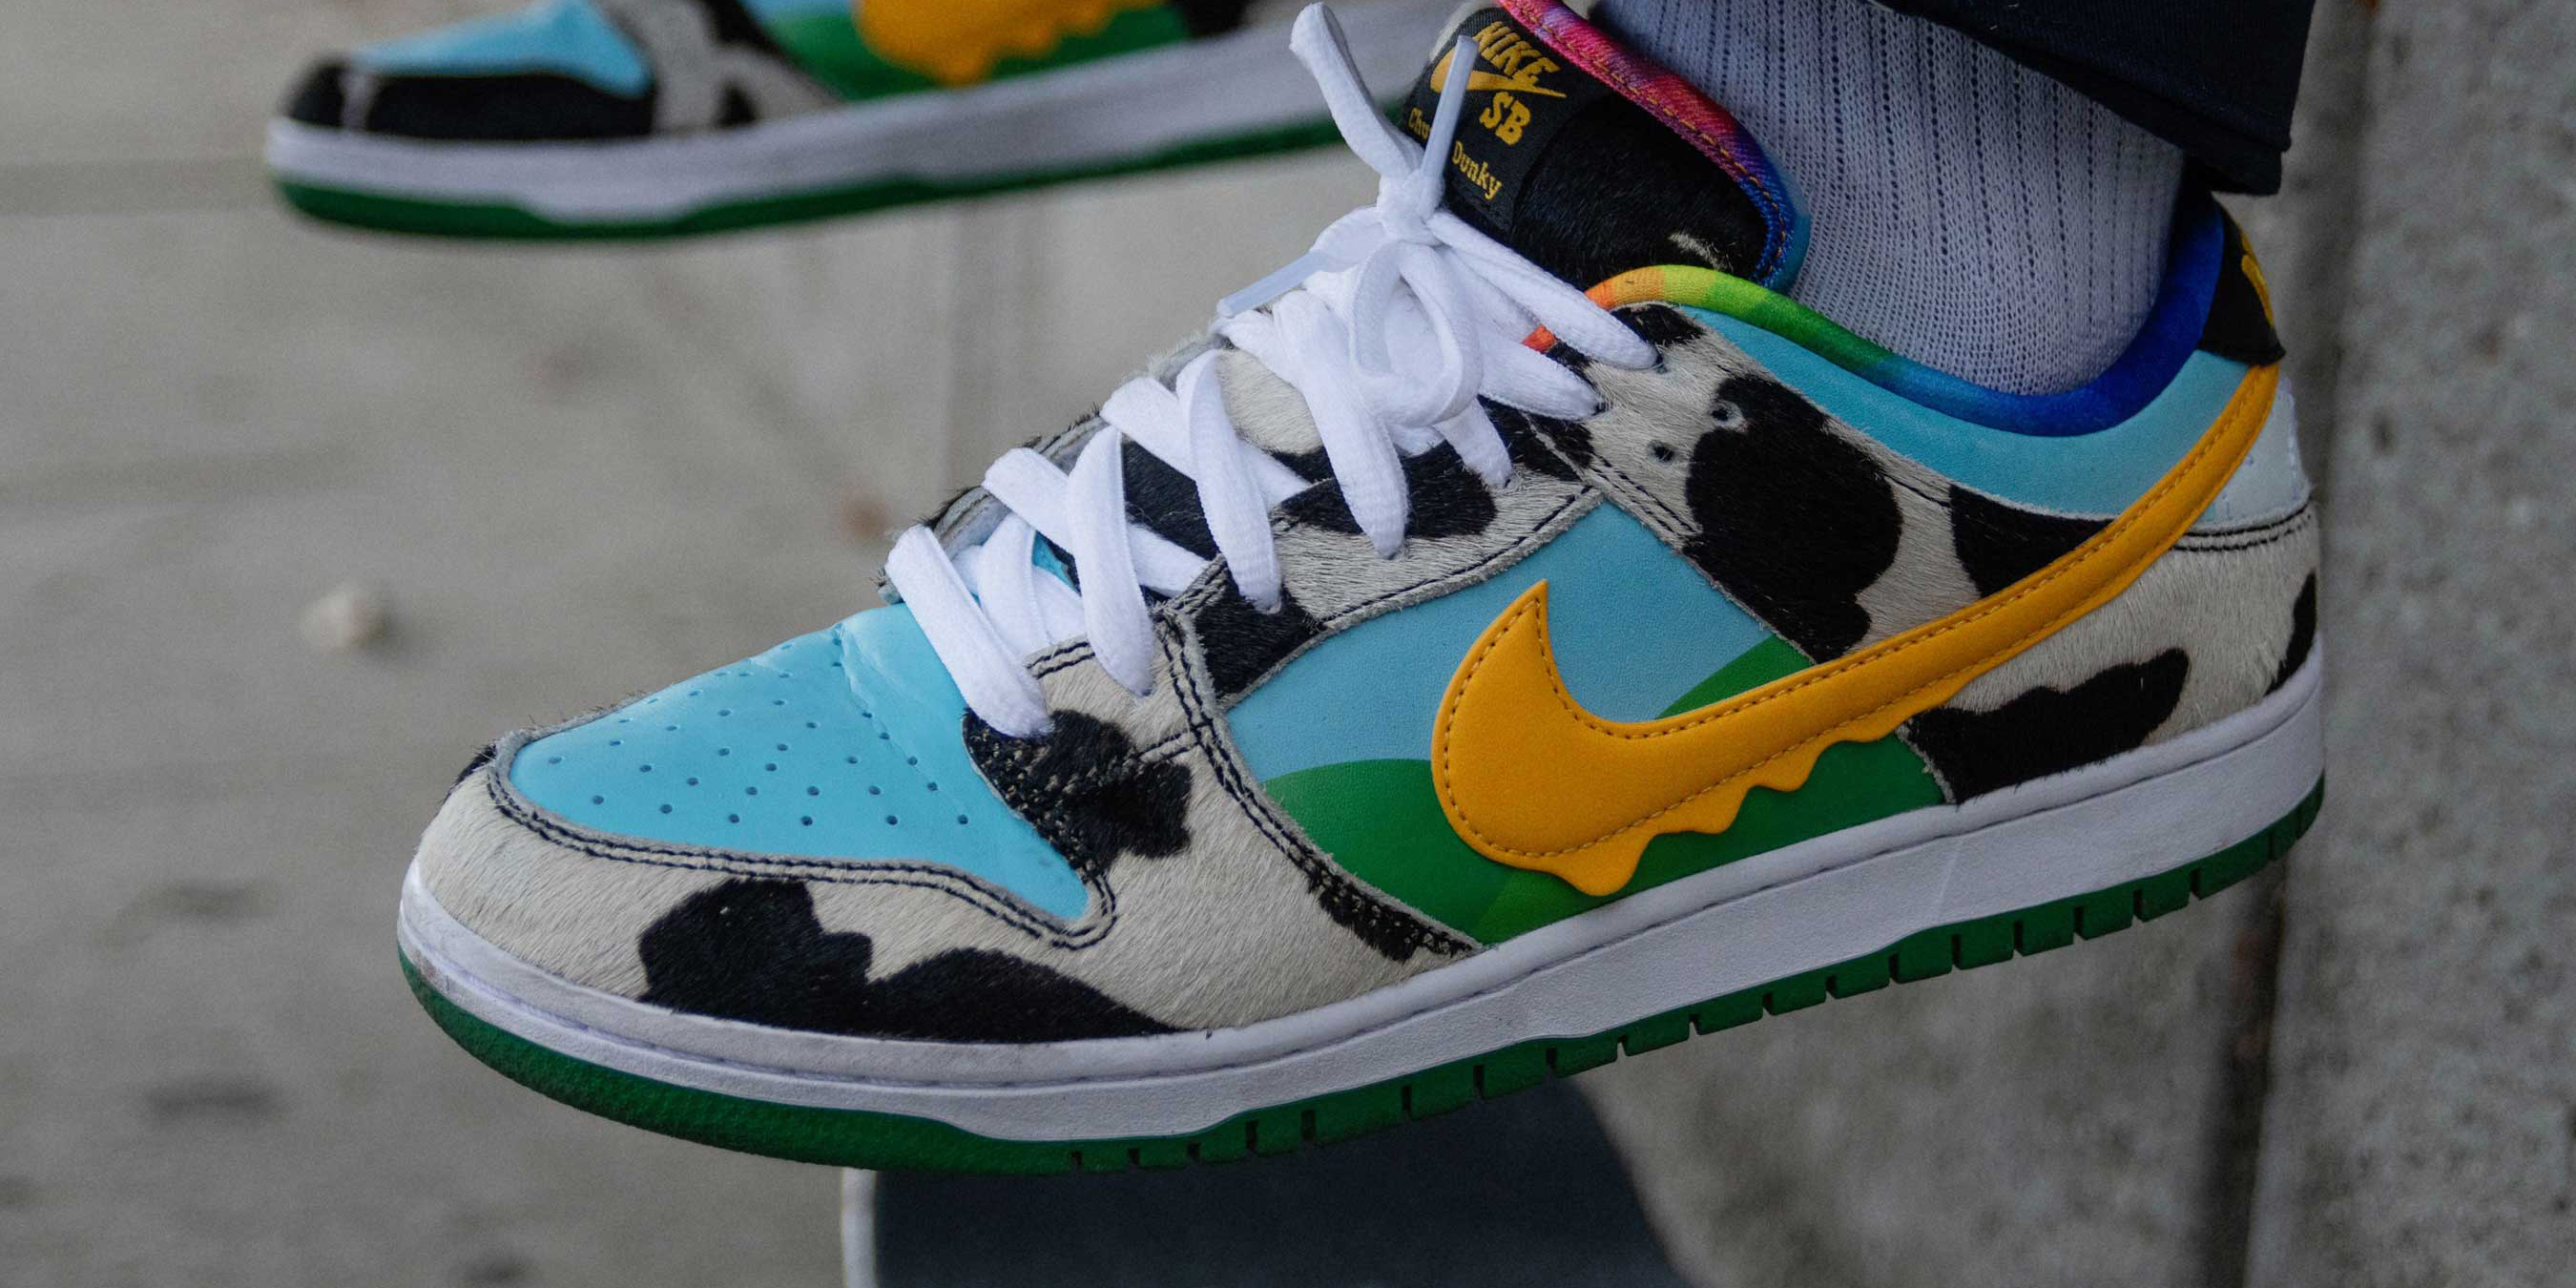 minusválido Hacia atrás infinito Nike SB collabs with Ben & Jerry's for a limited edition run - 9to5Toys